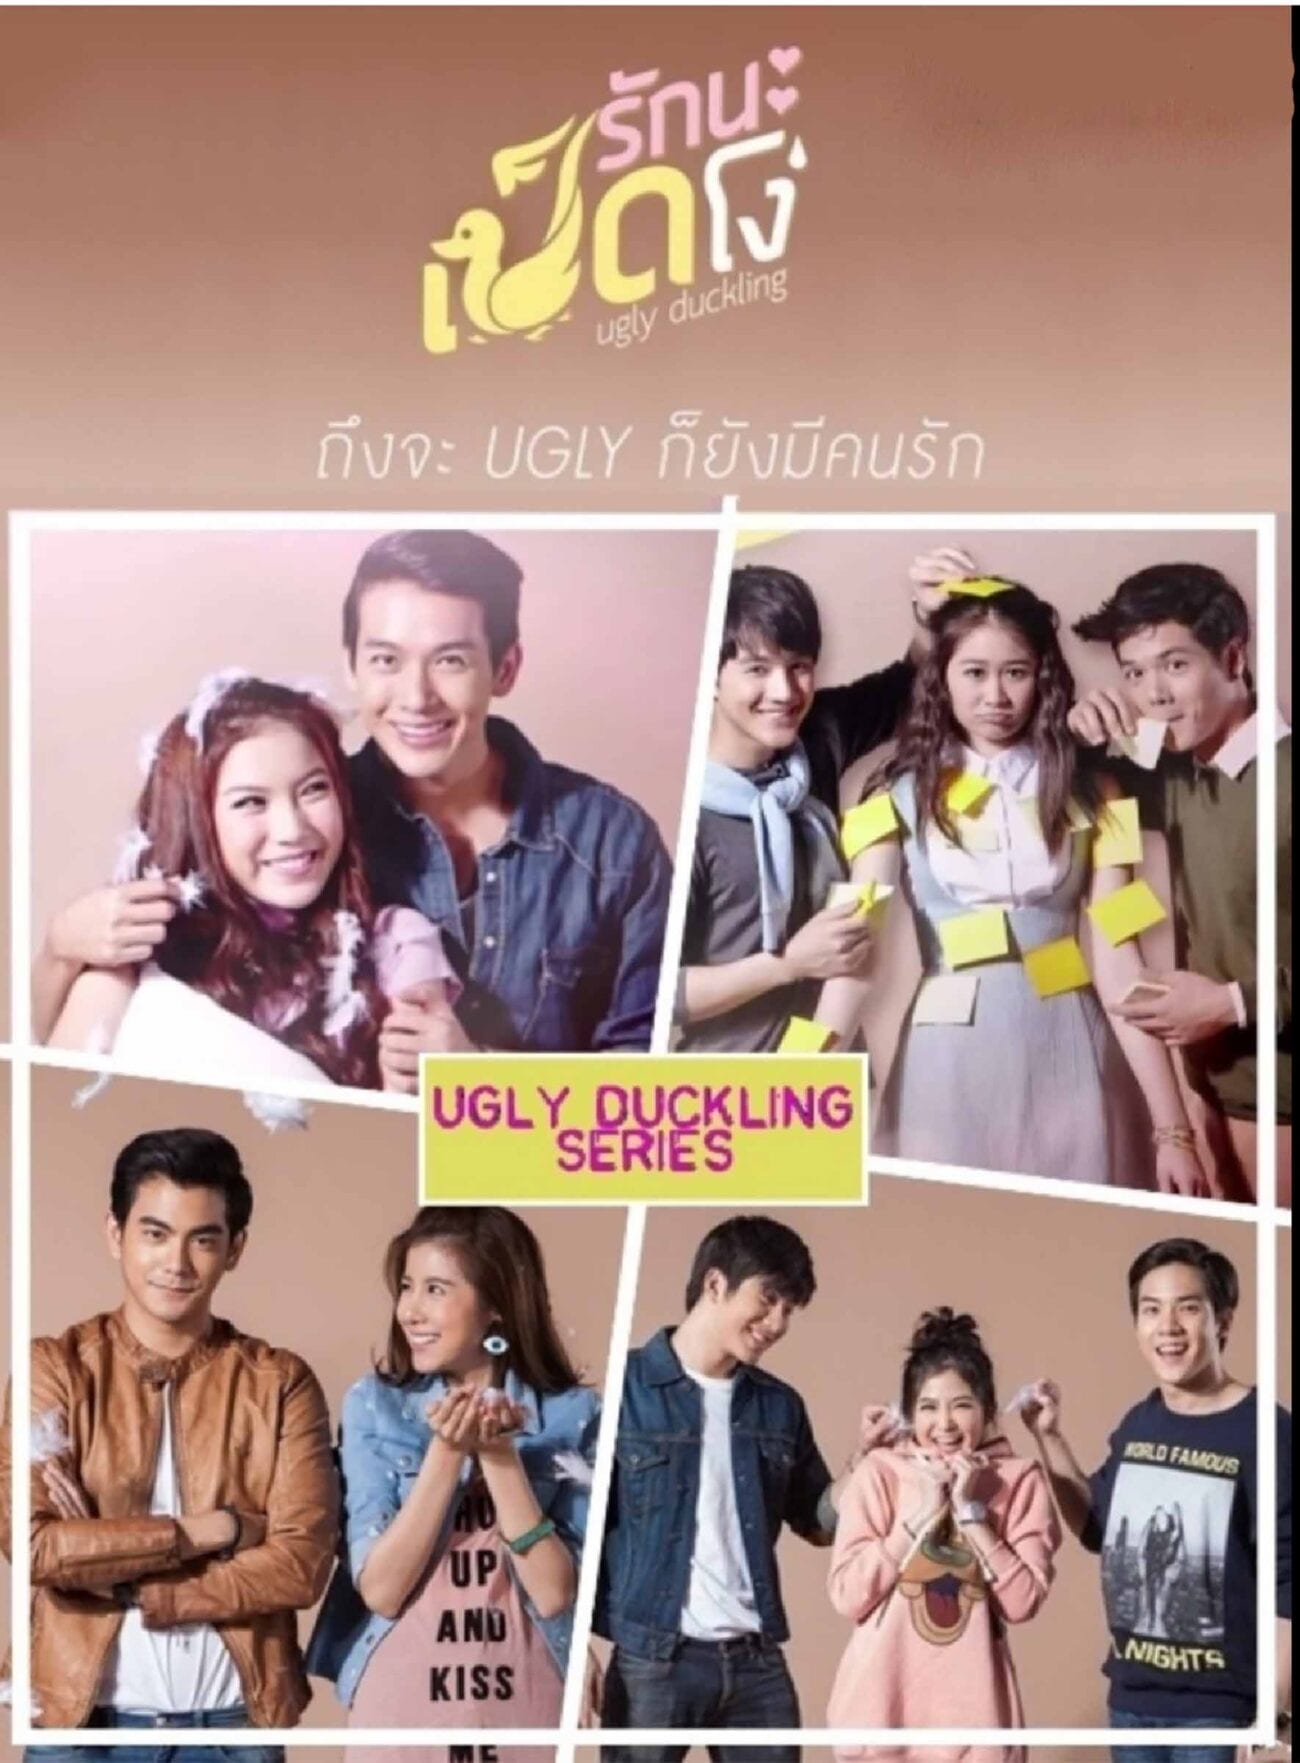 'The Ugly Duckling' Thai drama series is a fun take on the fables & fairytales that taught us beauty is only skin deep. Here are other Thai romance series.